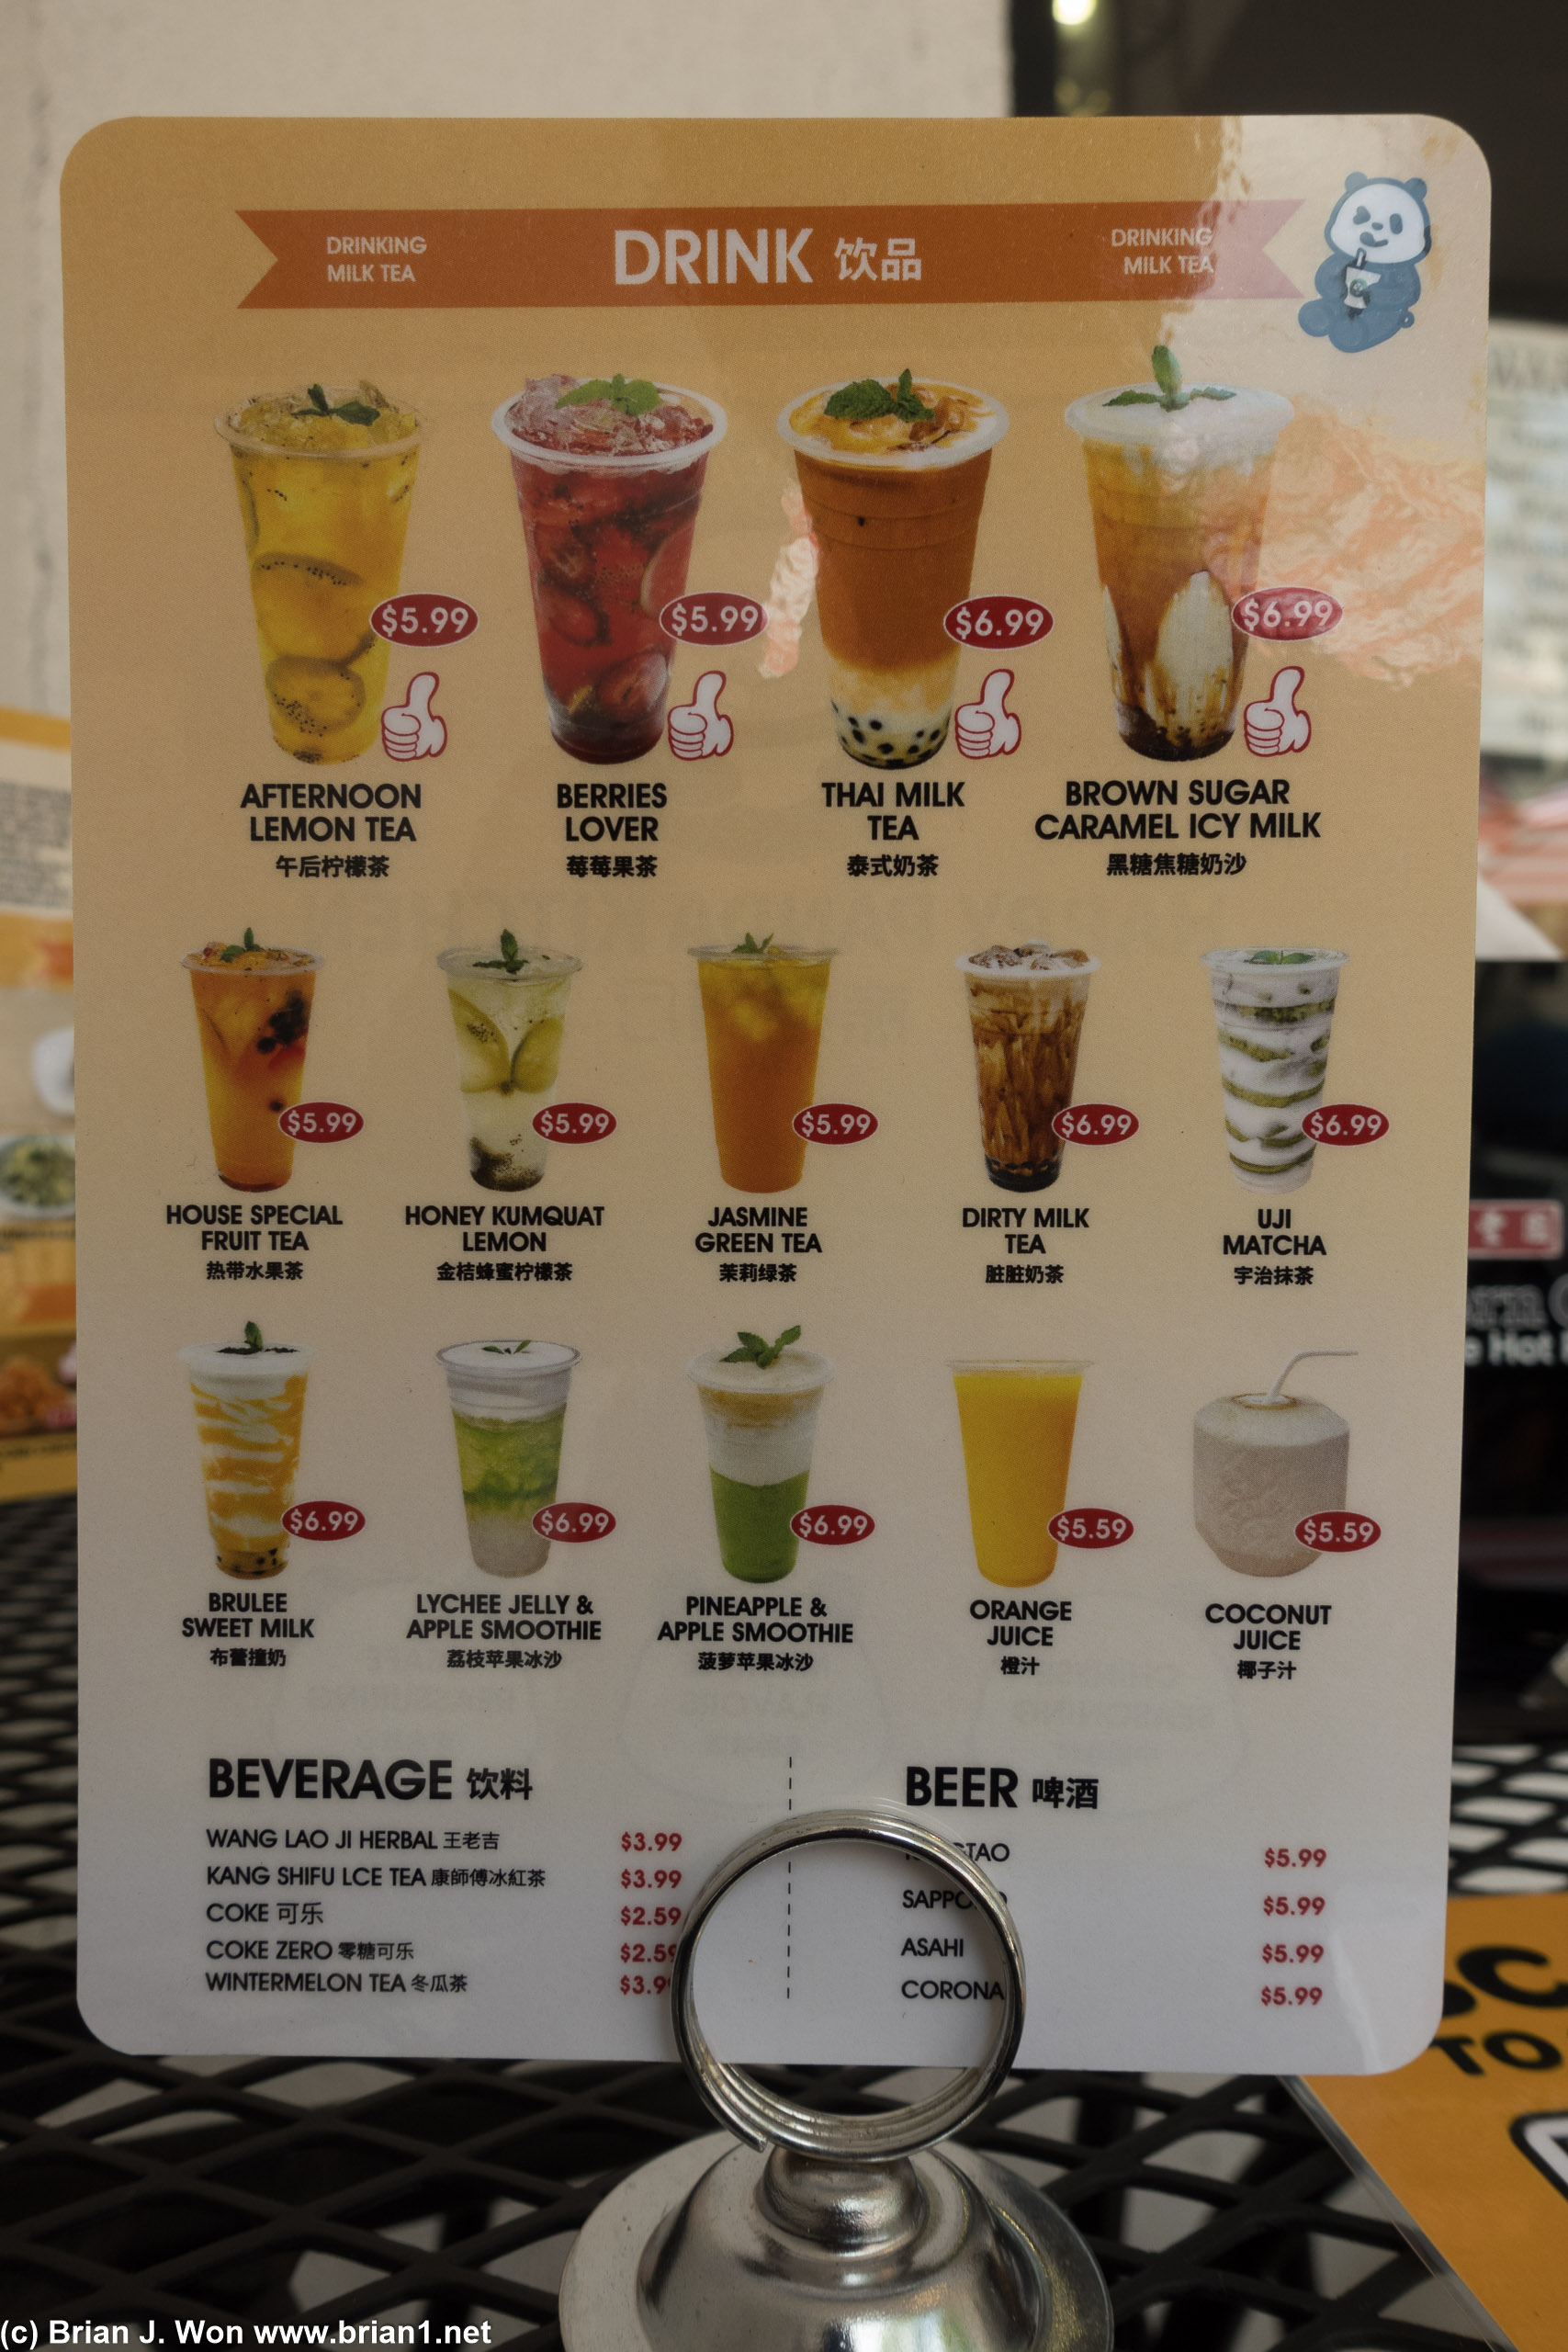 As are most of these drinks.